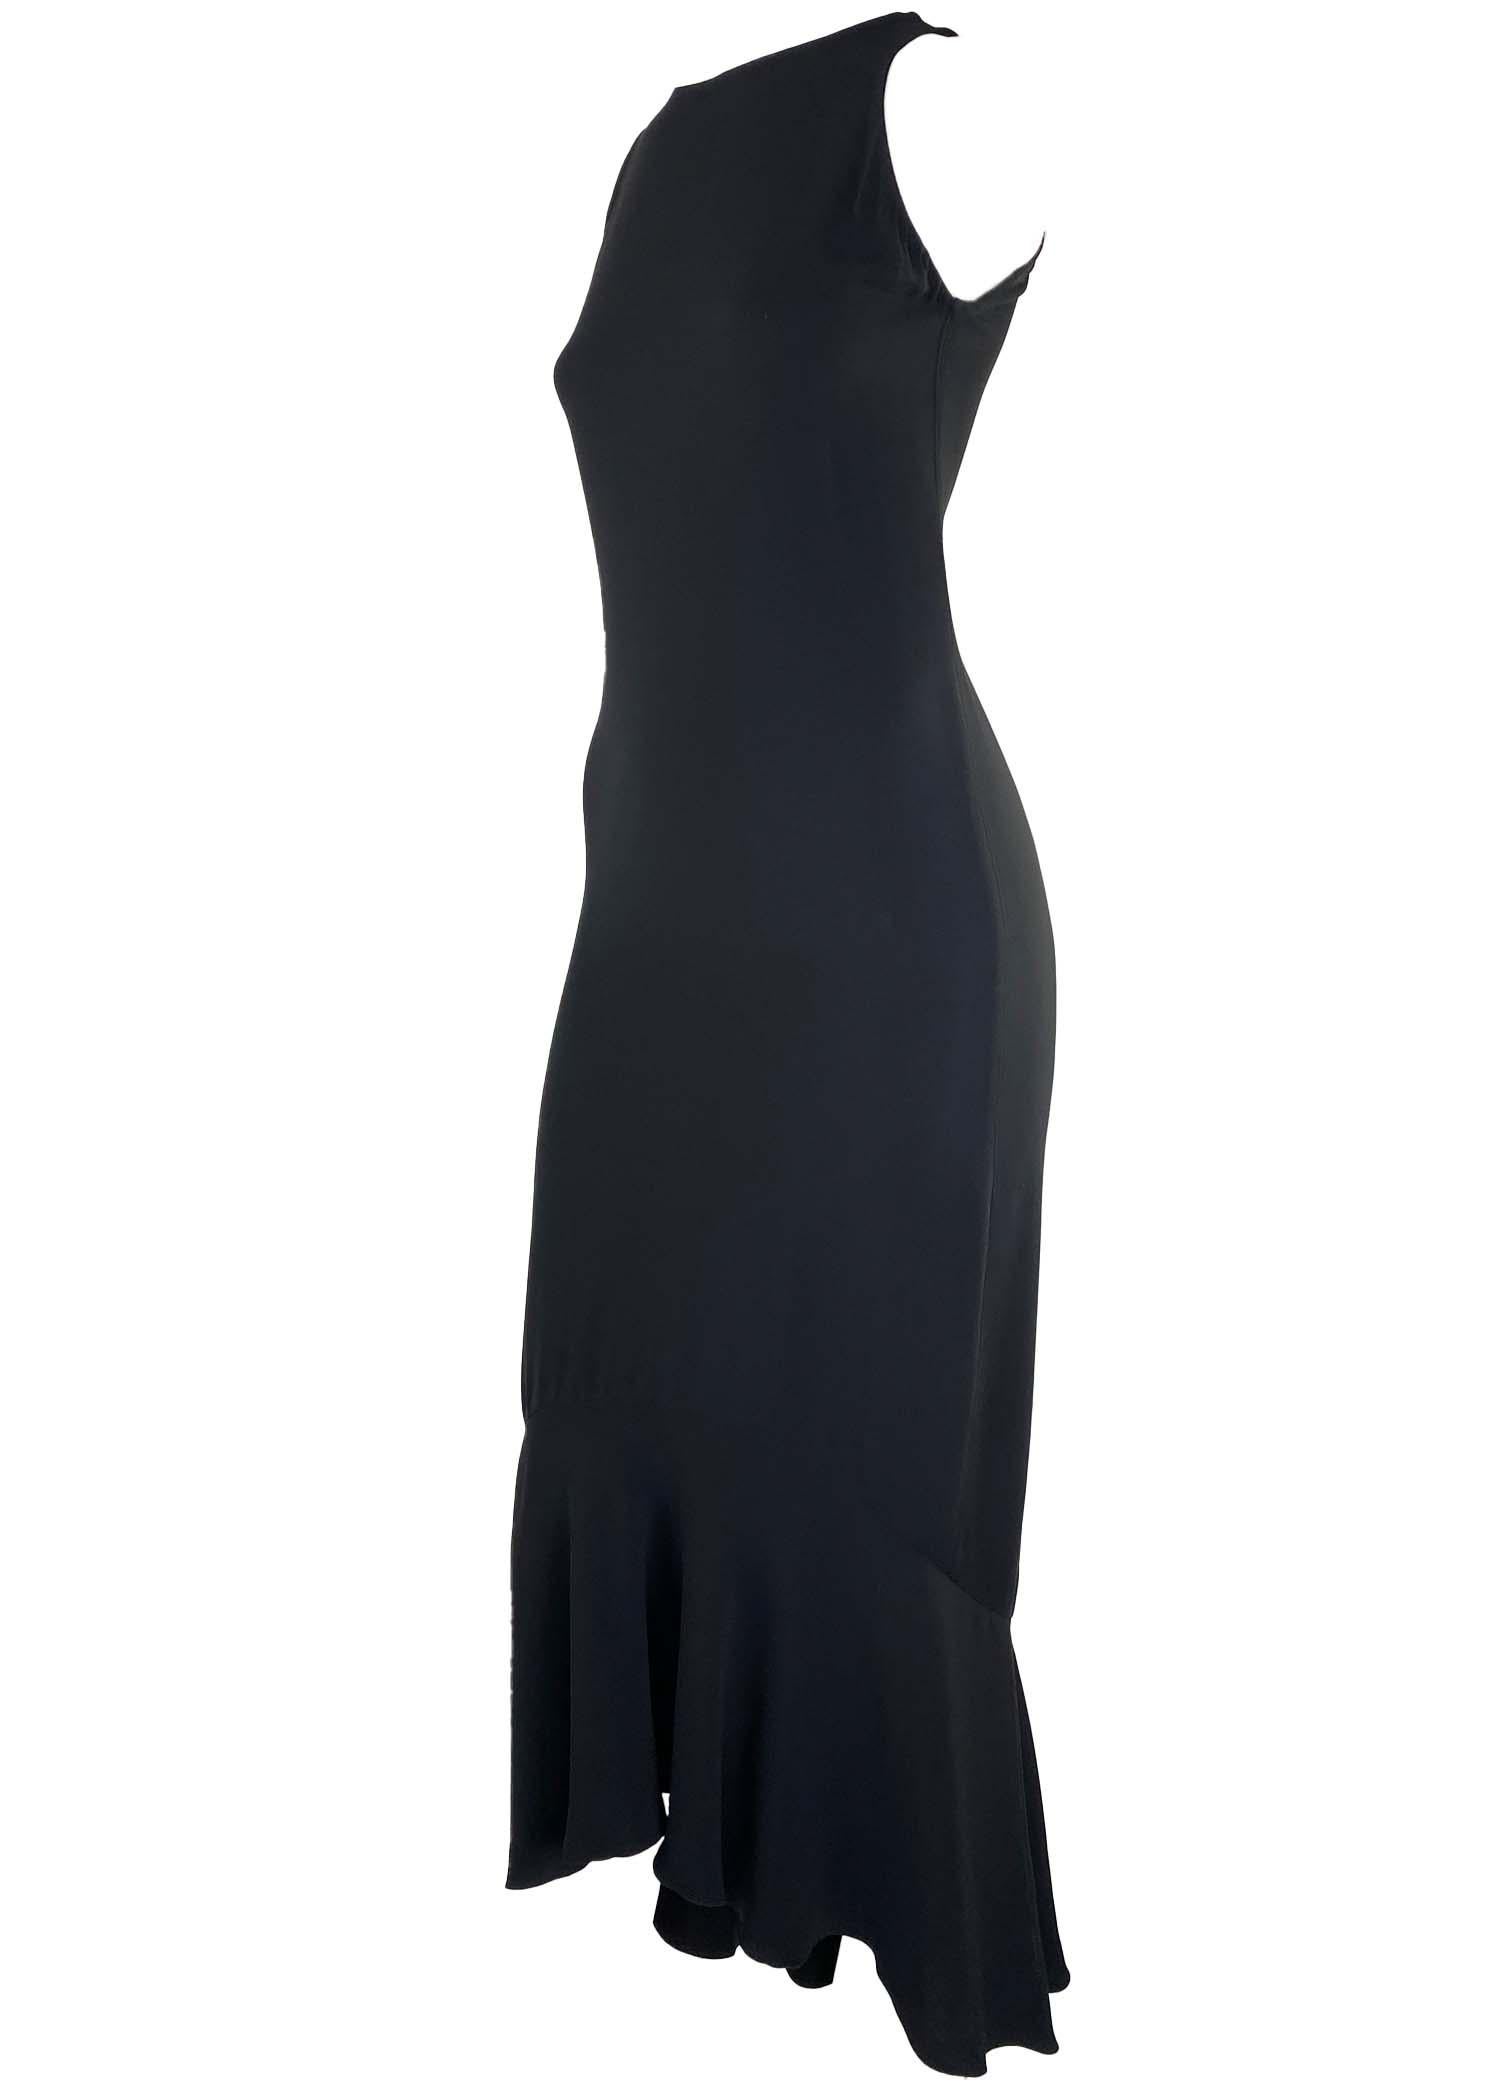 Presenting a vintage midi Gianni Versace dress, designed by Gianni Versace. This is the little black dress your wardrobe is missing. Simple and classy, the design and quality of this piece are impeccable. The dress features a fitted body capped with